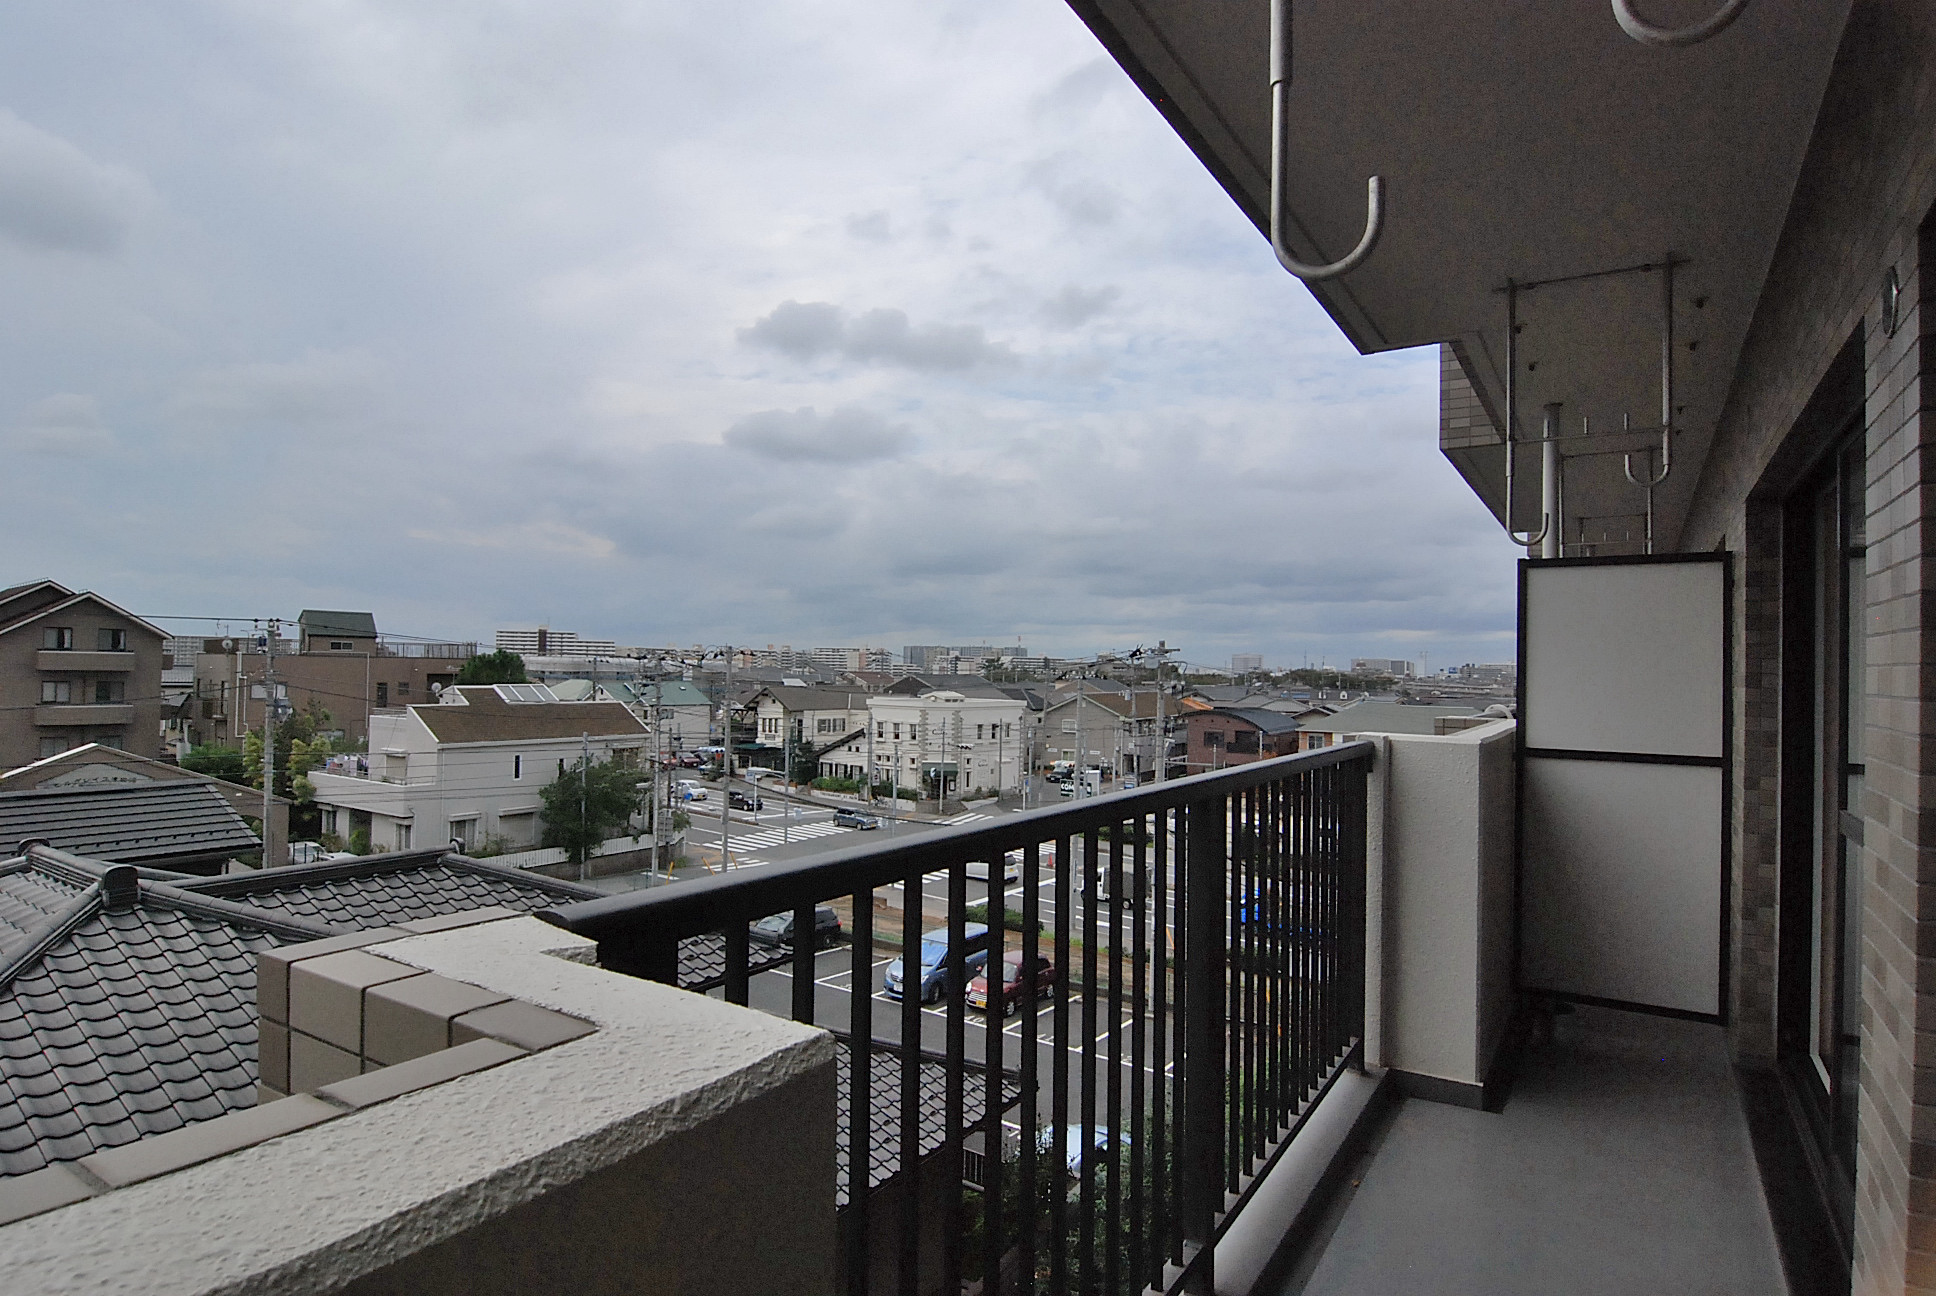 Balcony. View of a good room. The time of shooting Weather cloudy